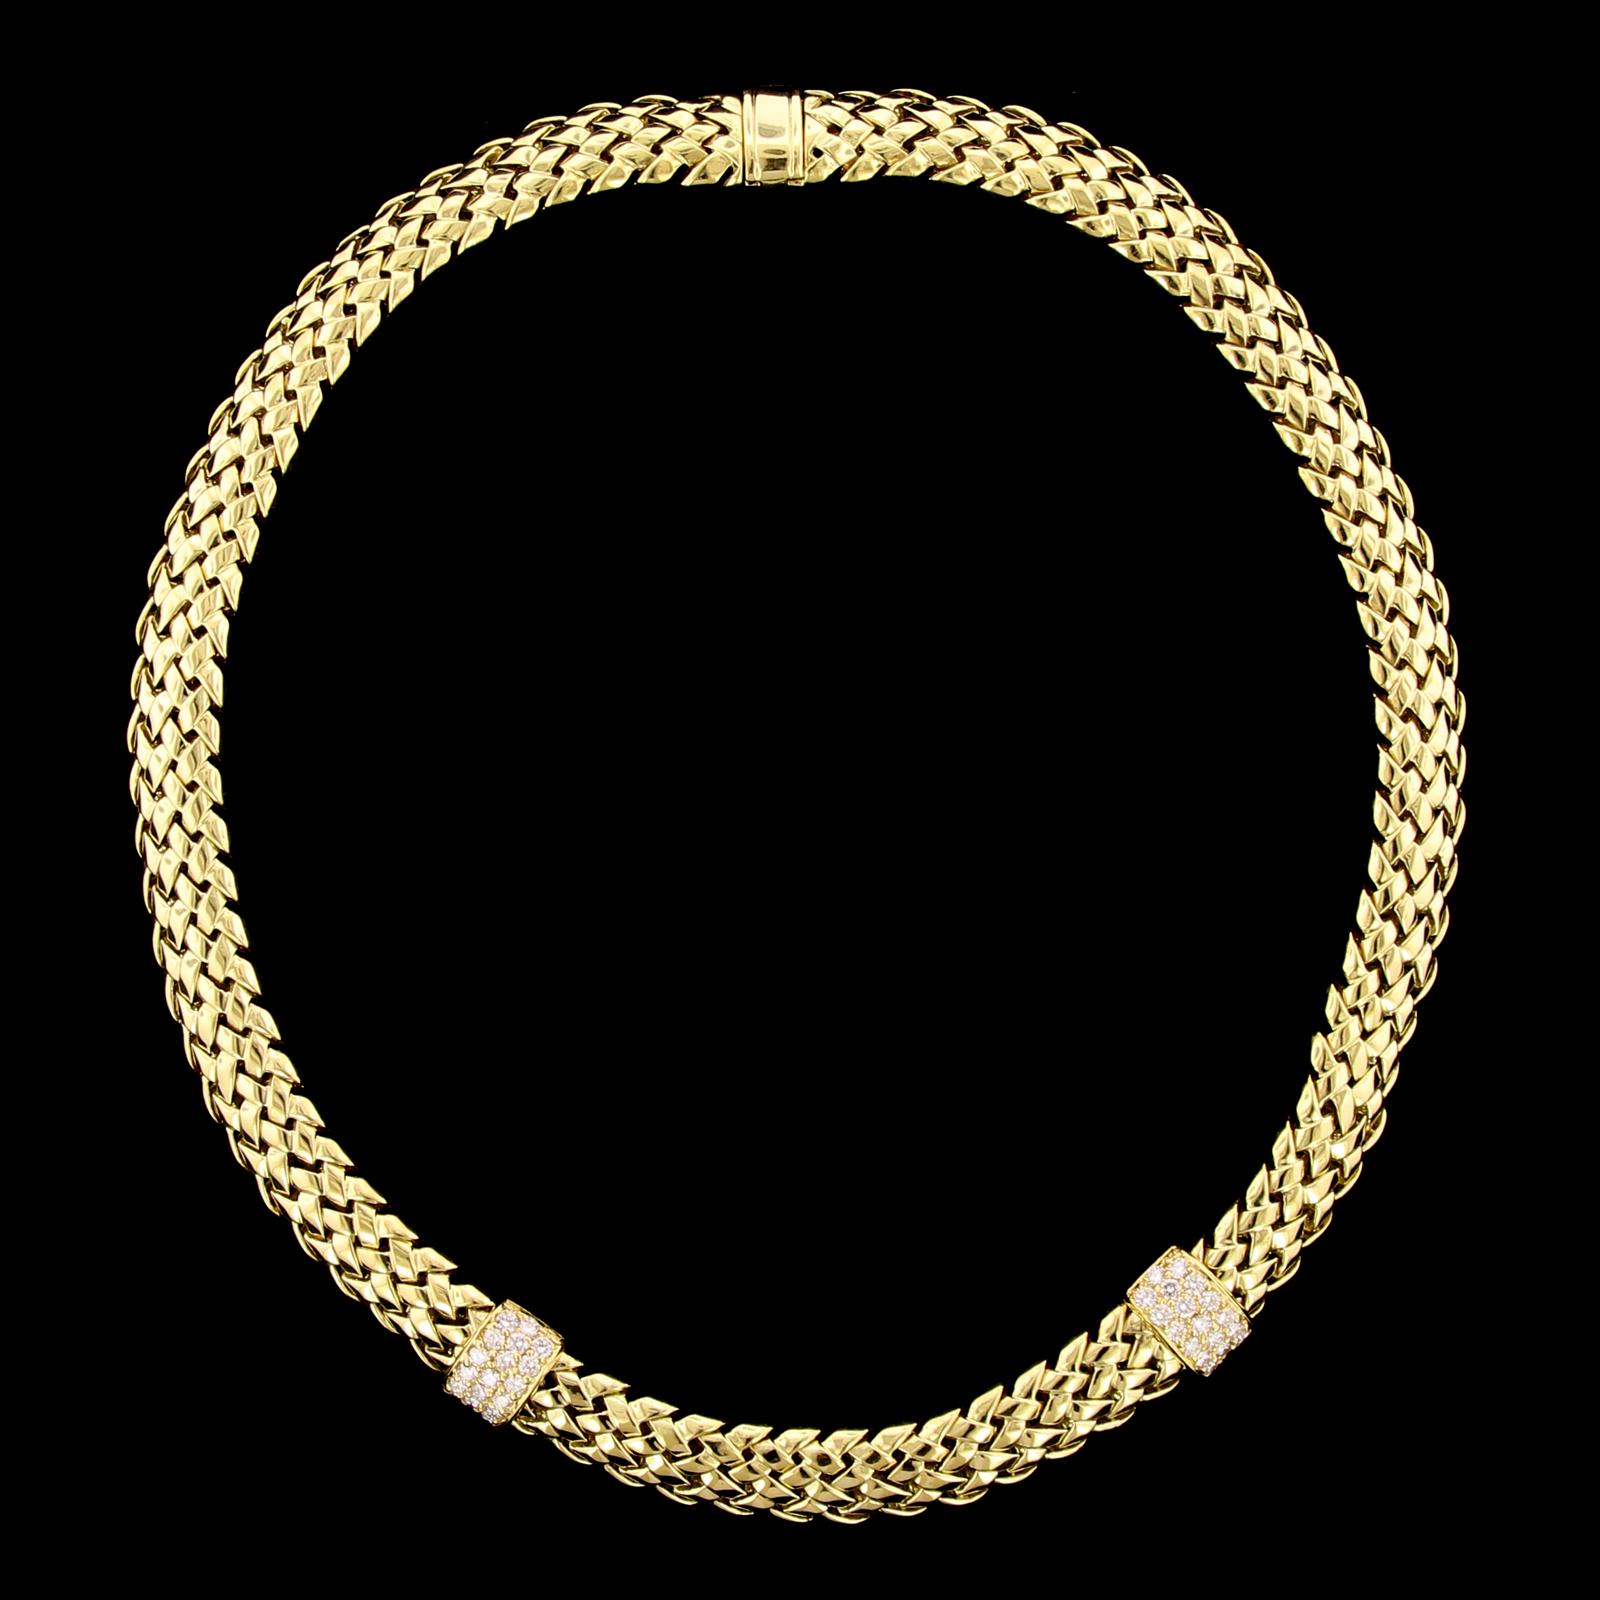 Tiffany & Co. 18K Yellow Gold and Diamond Vannerie Necklace. The woven link
necklace is designed with two stations pave set with 38 full cut diamonds,
approx. total wt. 1.85cts., F color, VS clarity, length 19